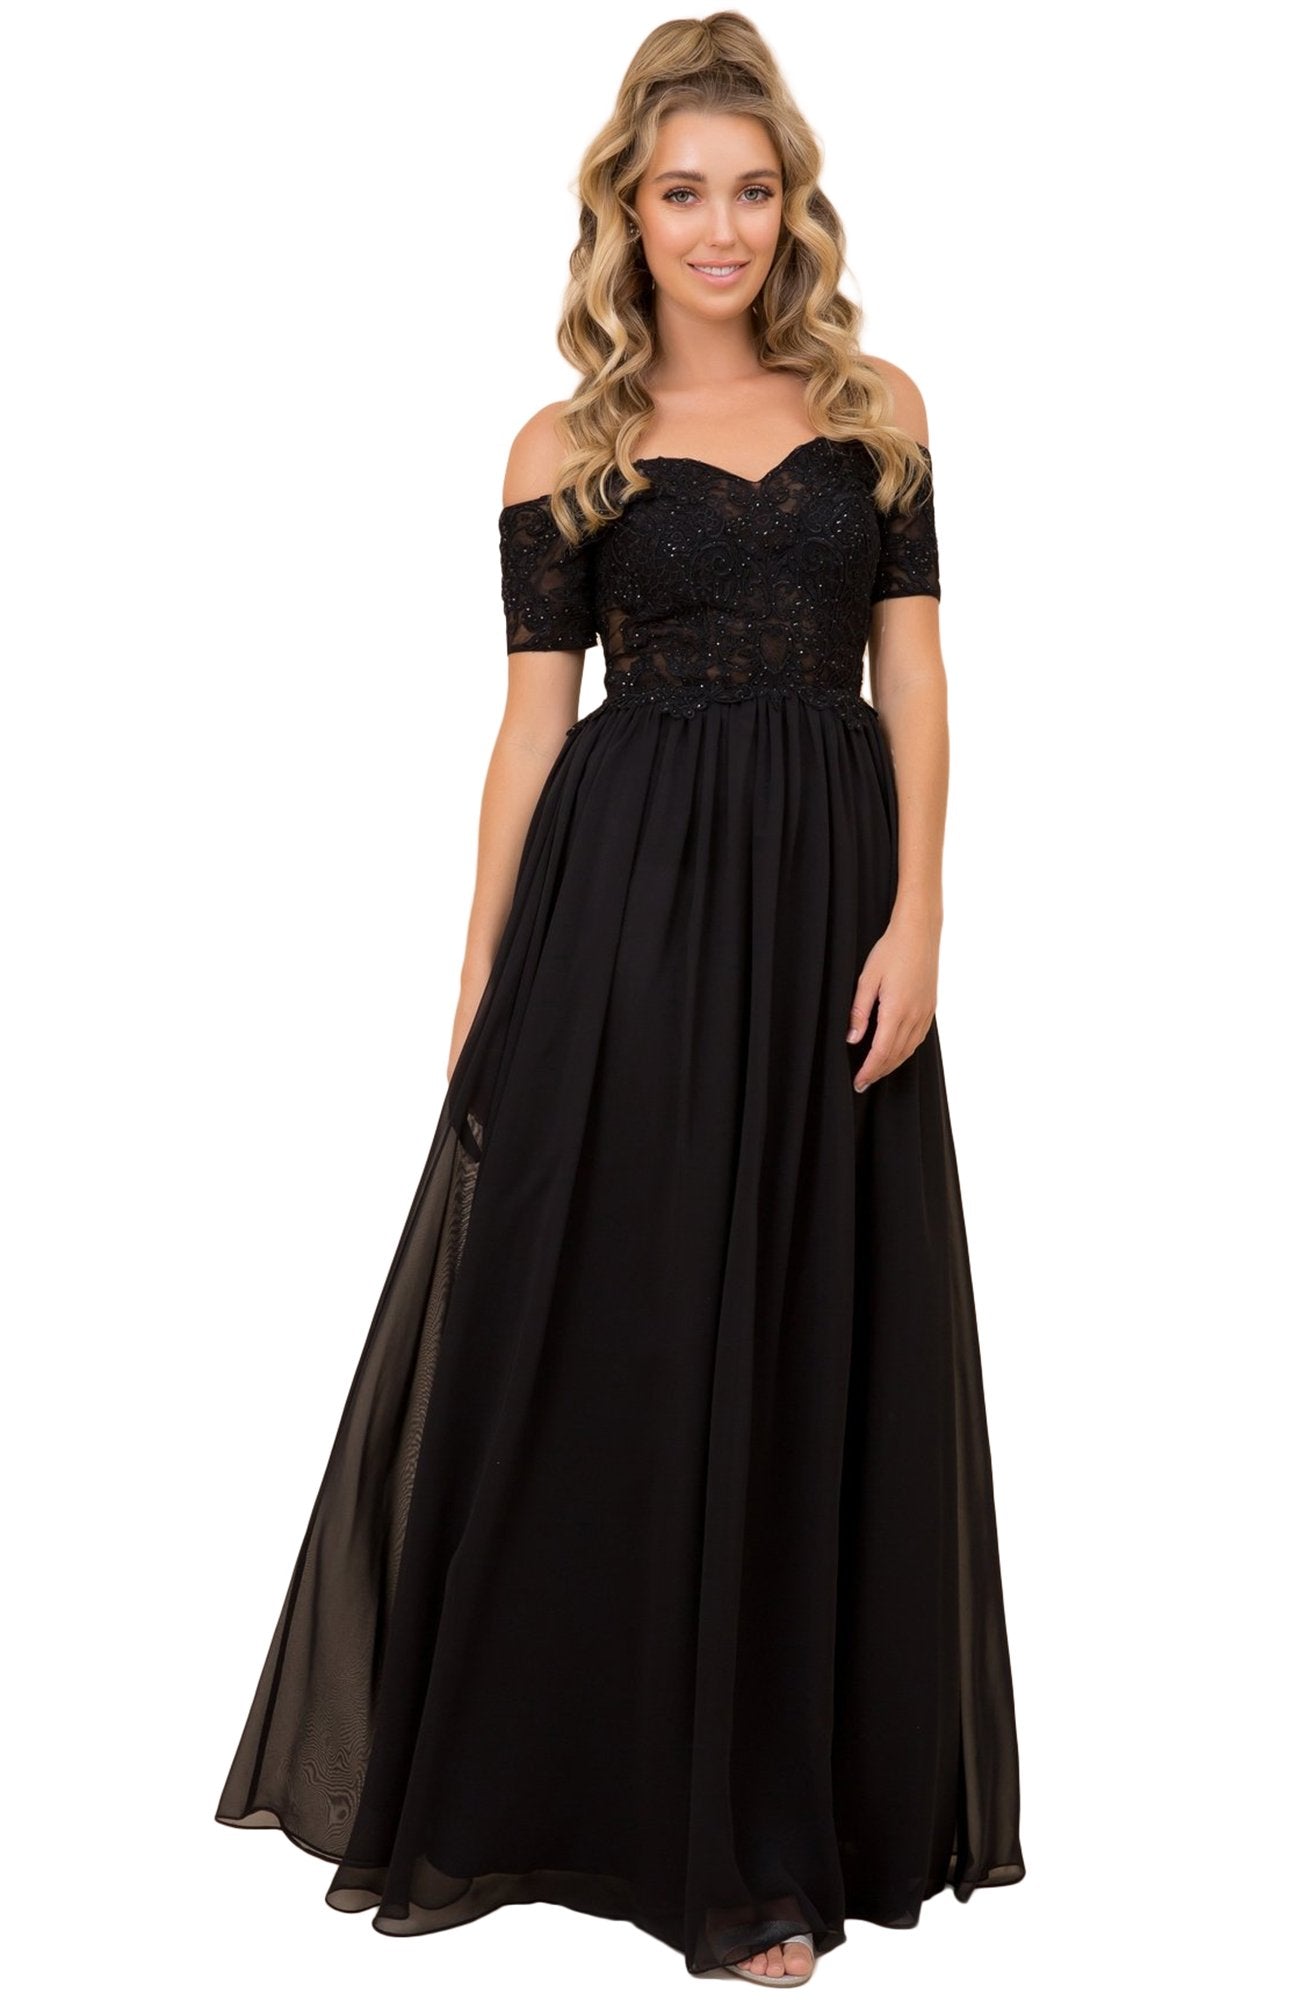 Nox Anabel - A061 Off Shoulder Lace Illusion Bodice Gown In Black